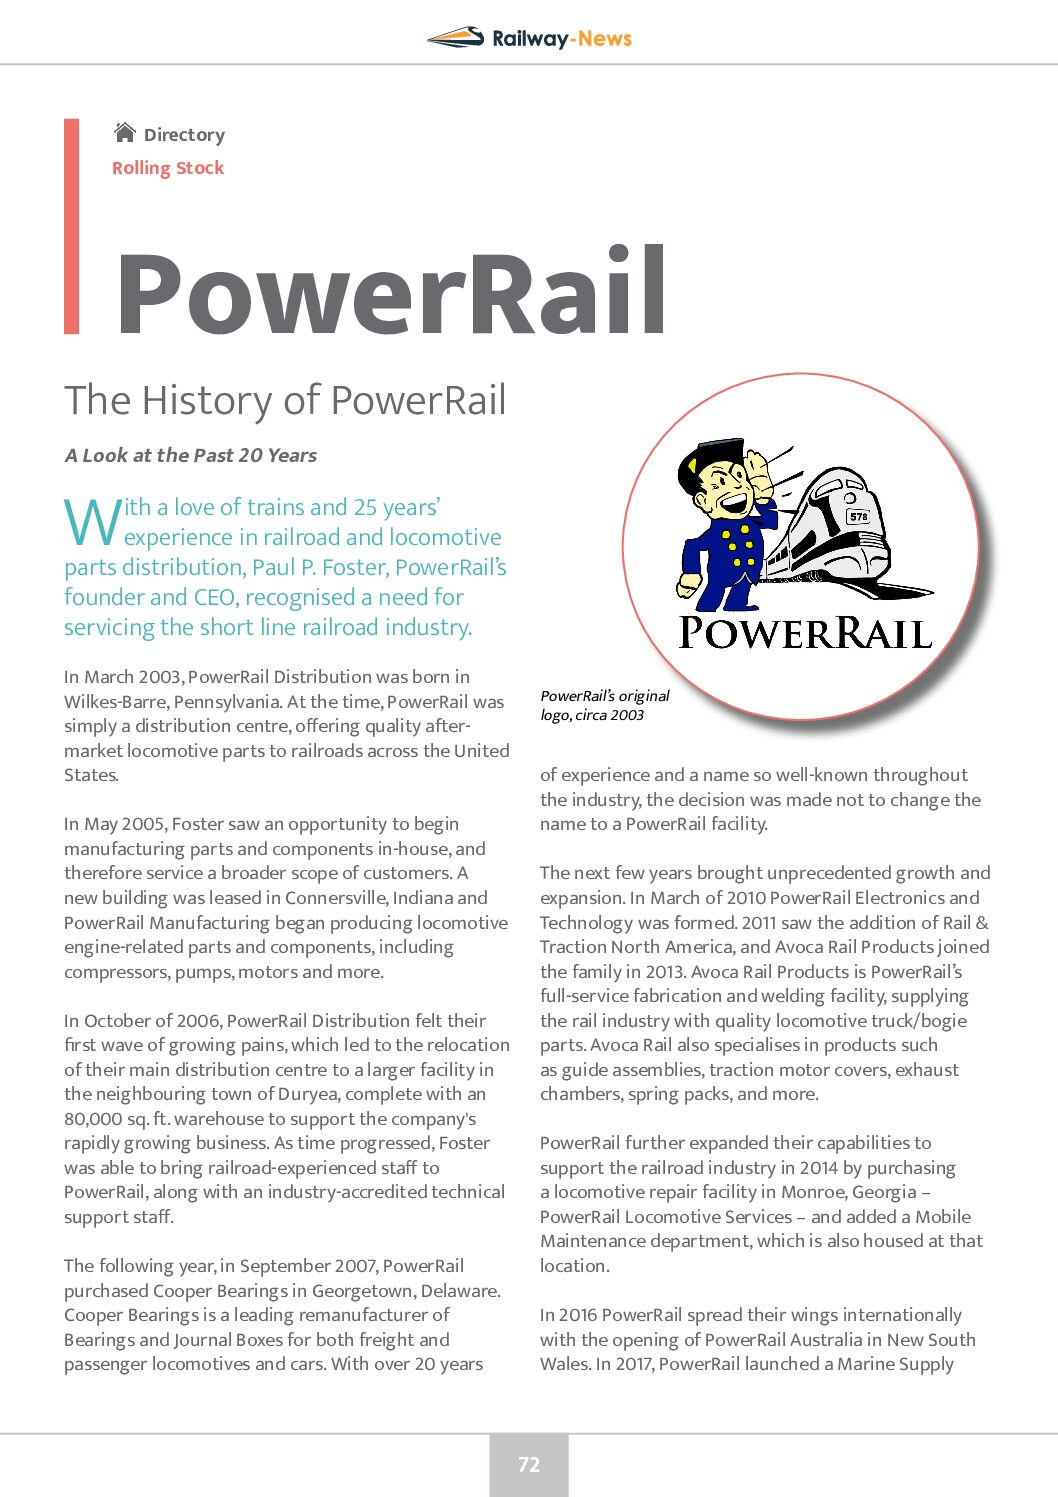 The History of PowerRail